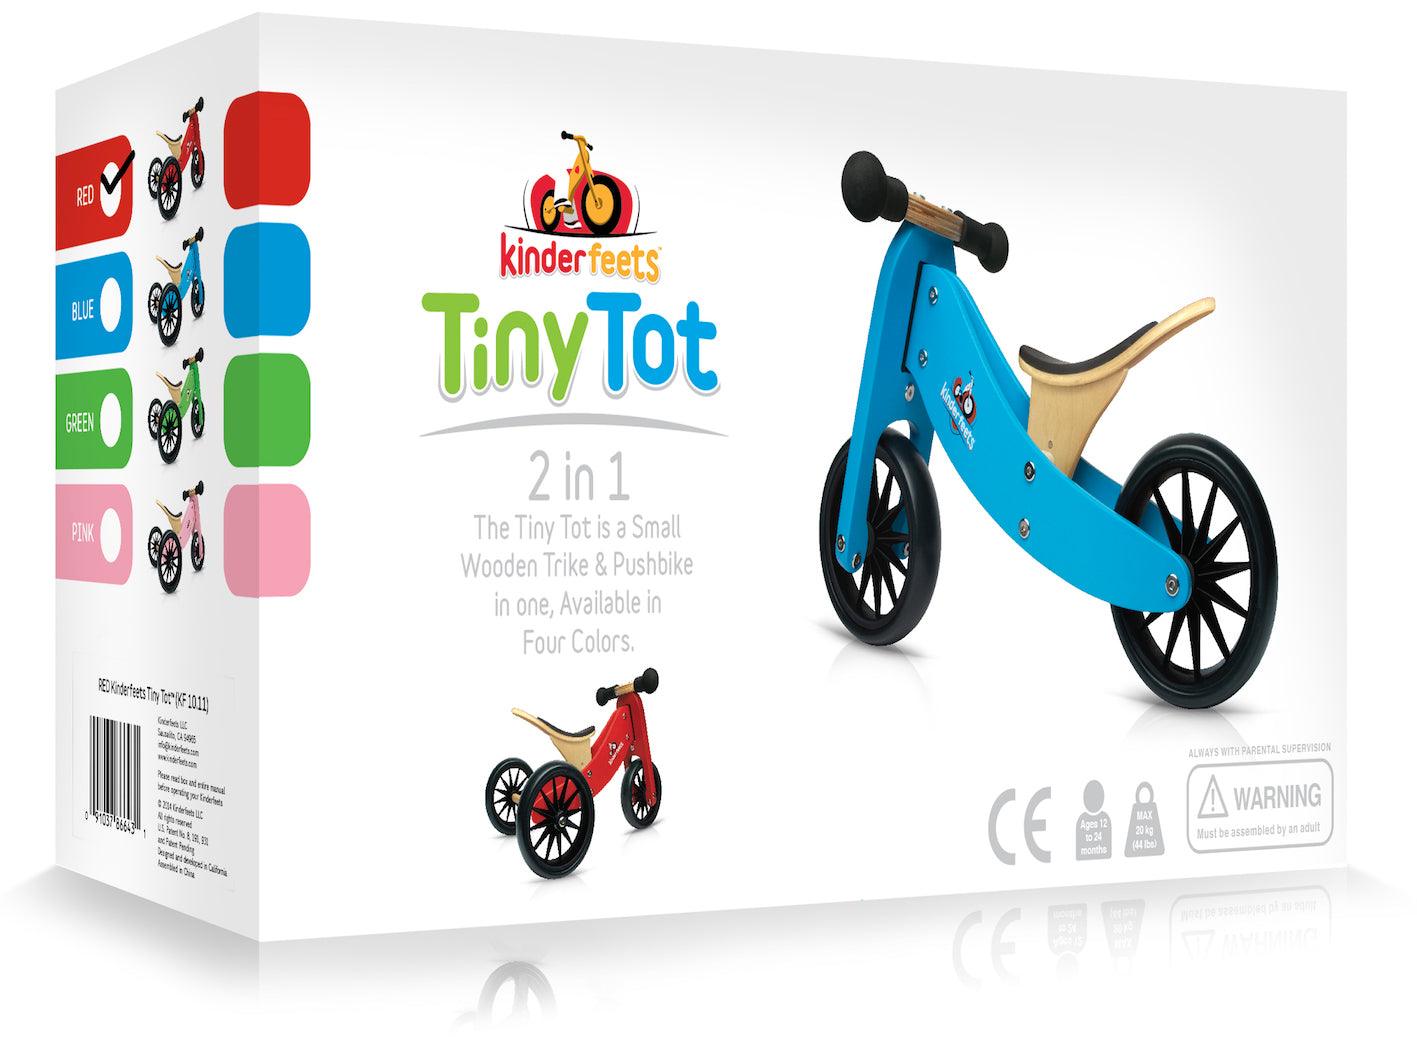 Kinderfeets TINY TOT Trike converts to a 2 wheeled Balance Bike 2-in-1 (Bamboo) & Sage Green Toddler Safety Helmet for toddlers and young children training on a no pedals running bike / tricycle